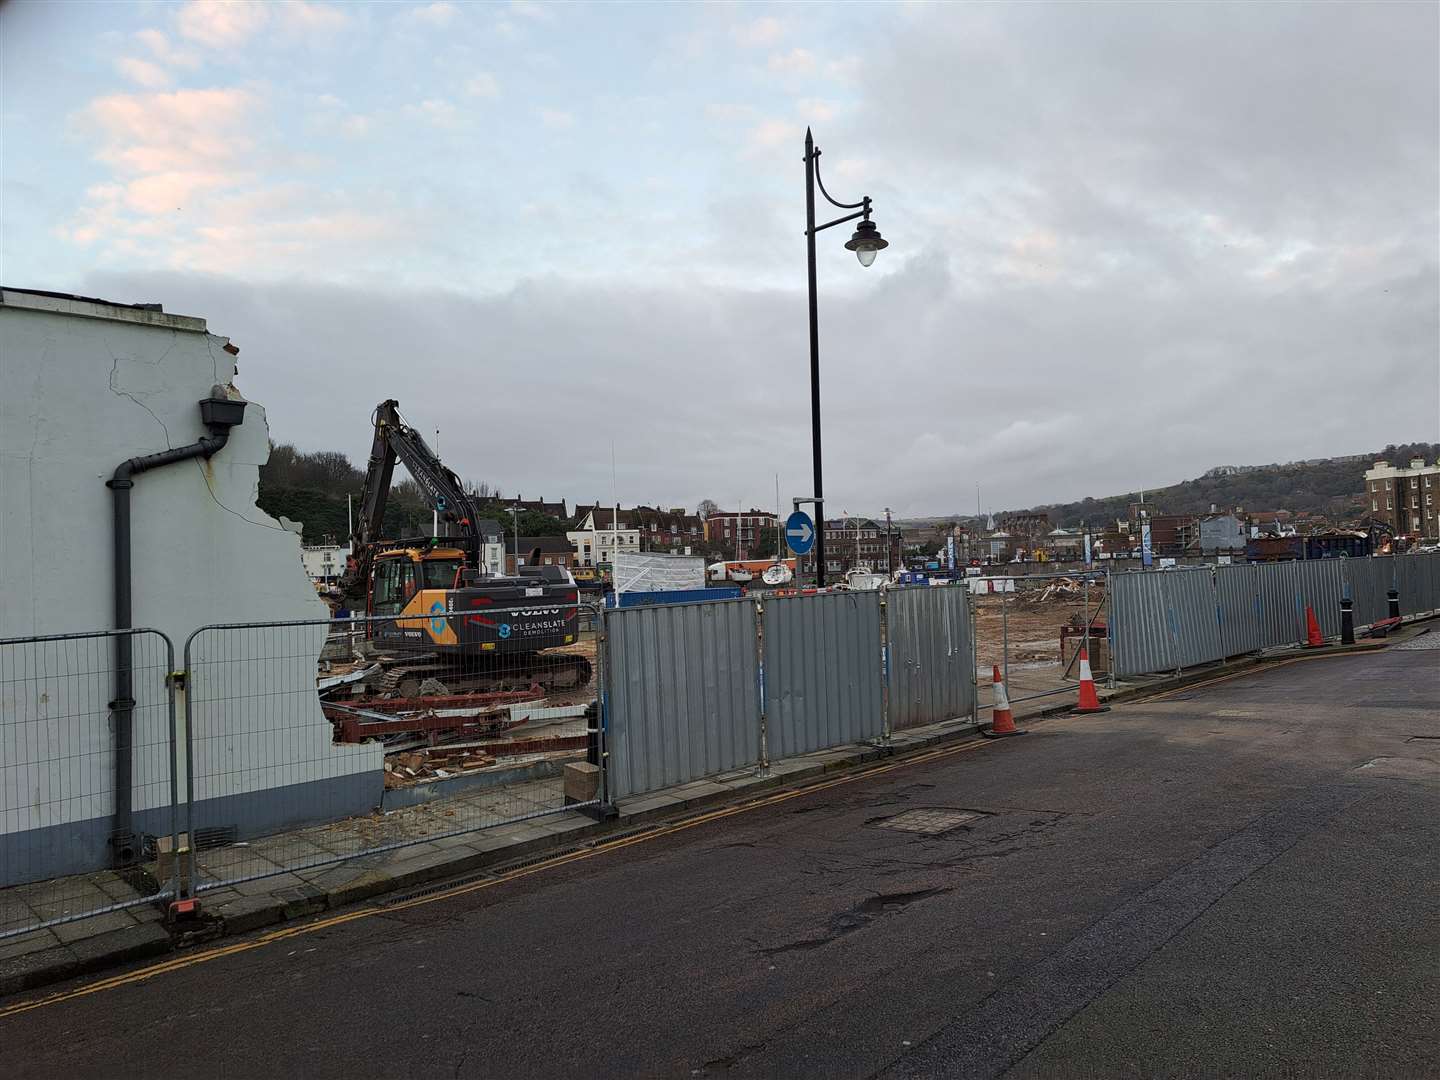 An interim car park is expected to replace the site. Pictures: Sam Lennon